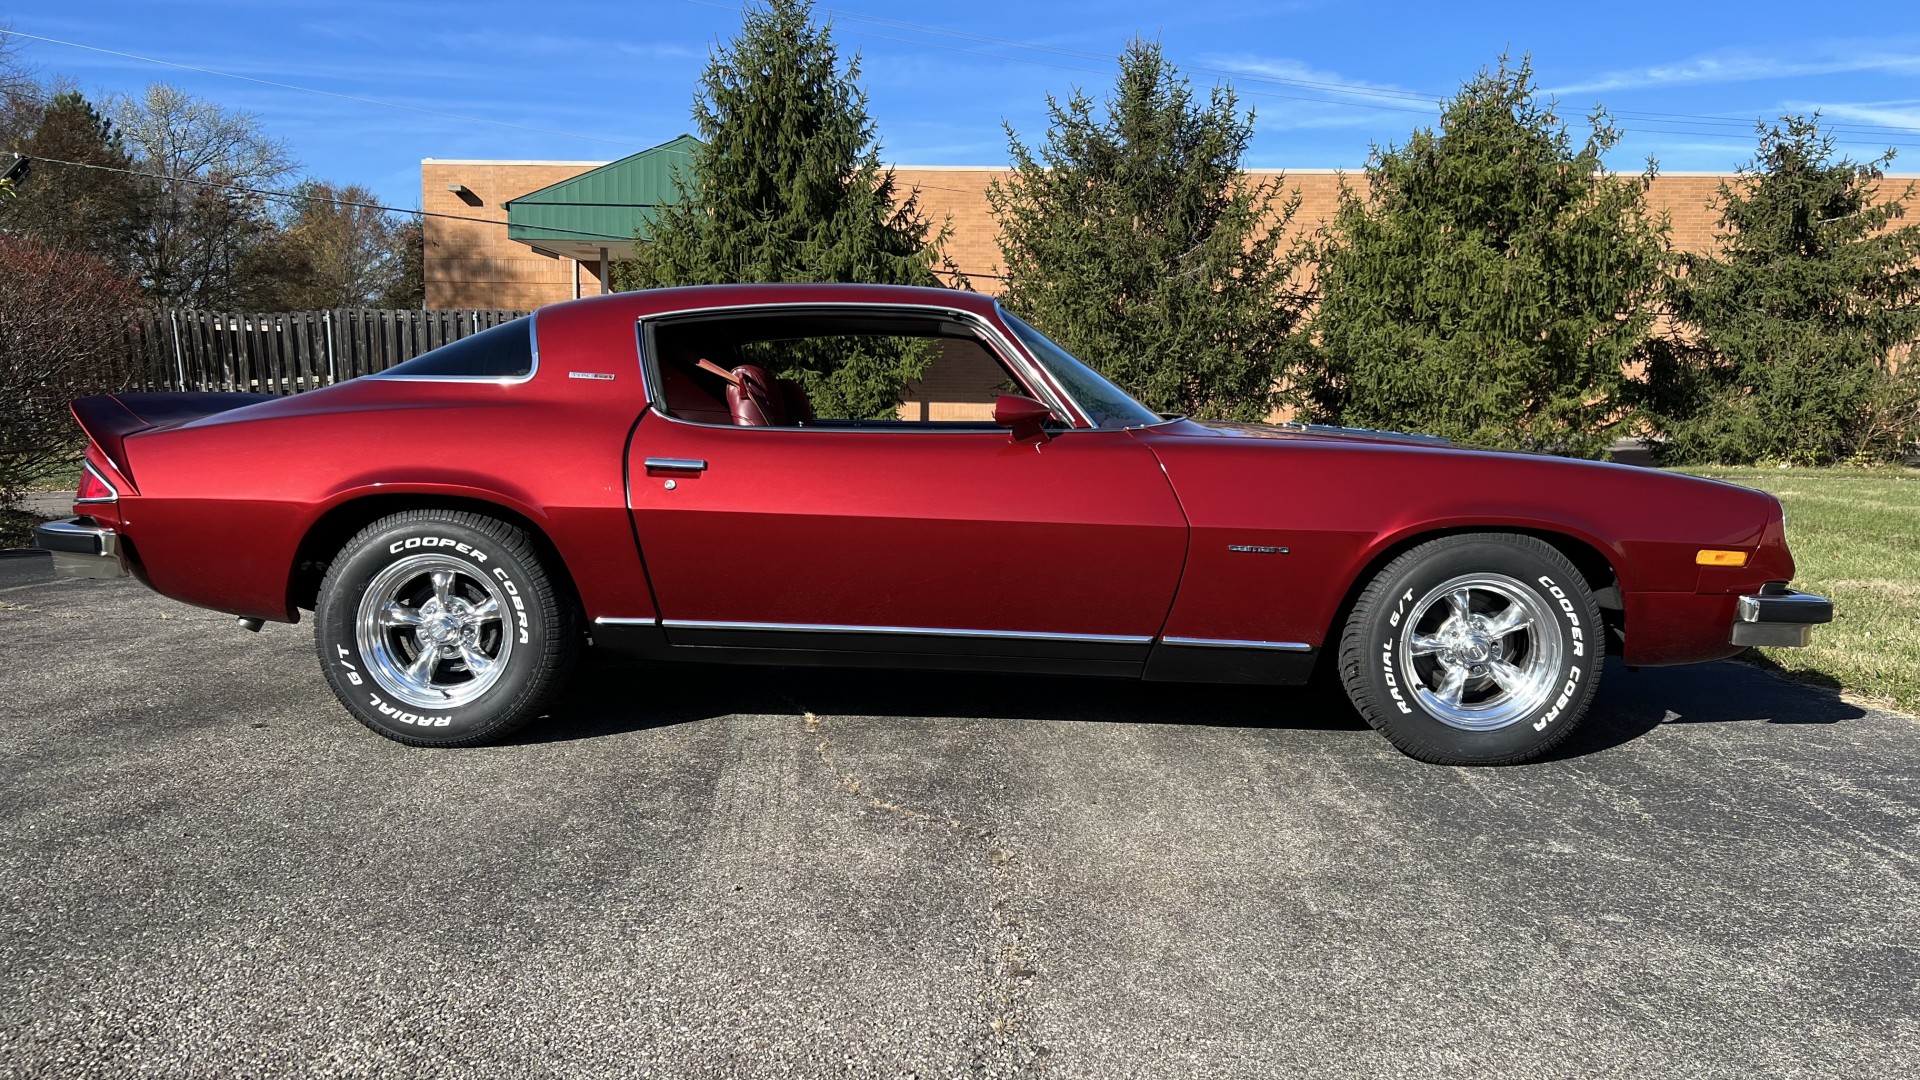 1975 Chevy Camaro Type LT, 350 Crate Engine, Sold! | Cincy Classic Cars